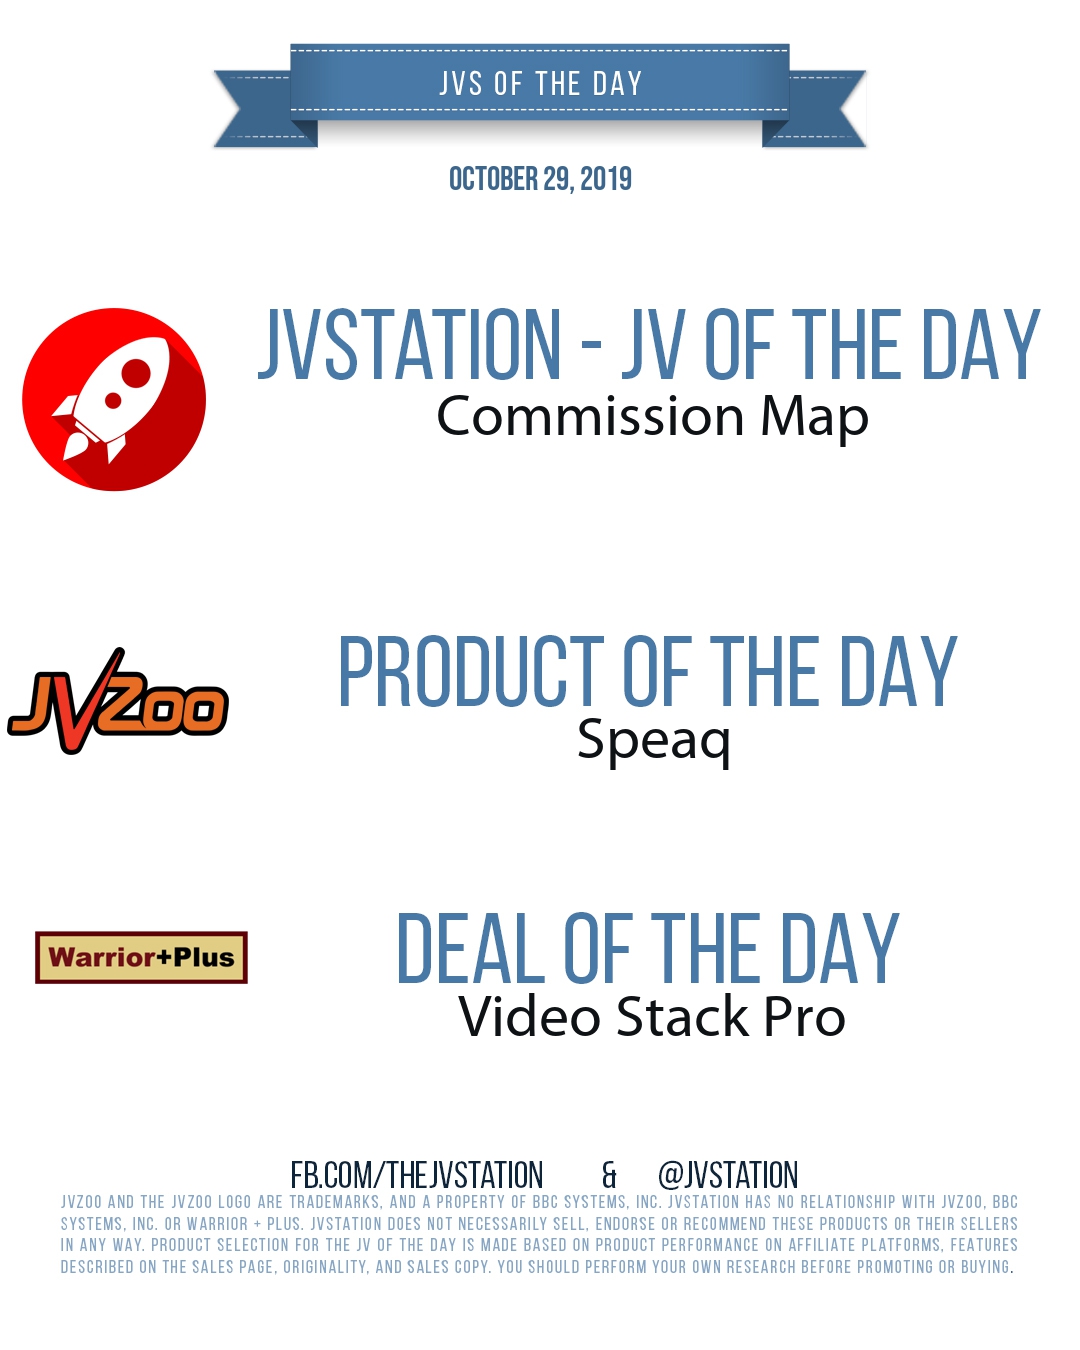 JVs of the day - October 29, 2019